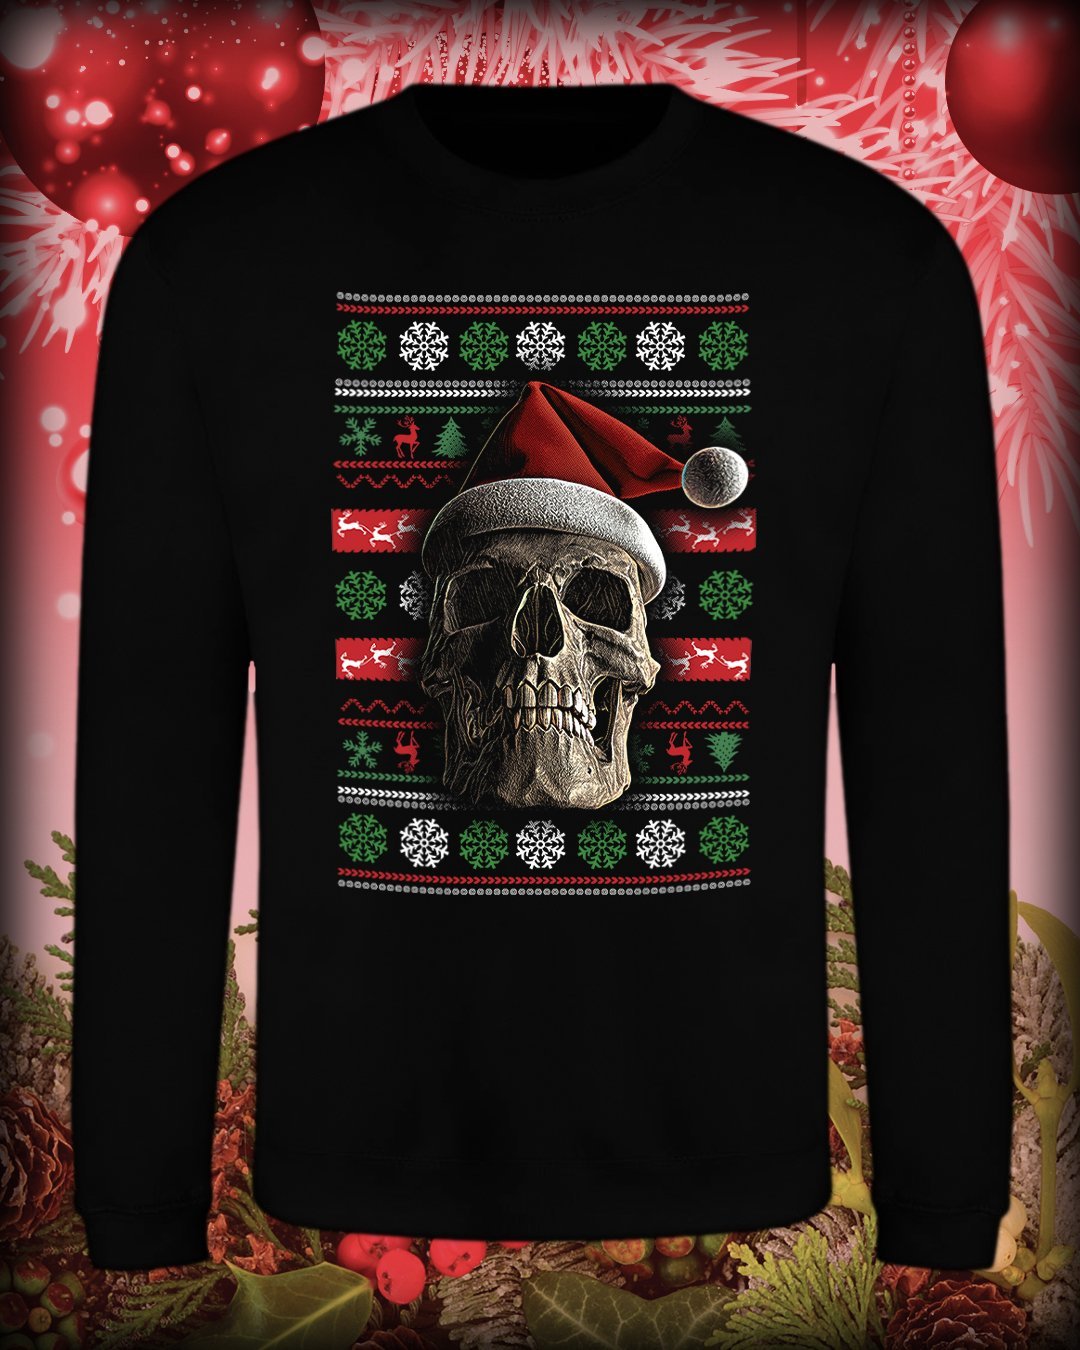 Santa Skull with Christmas Jumper Decals on Black Sweater - Cleekers